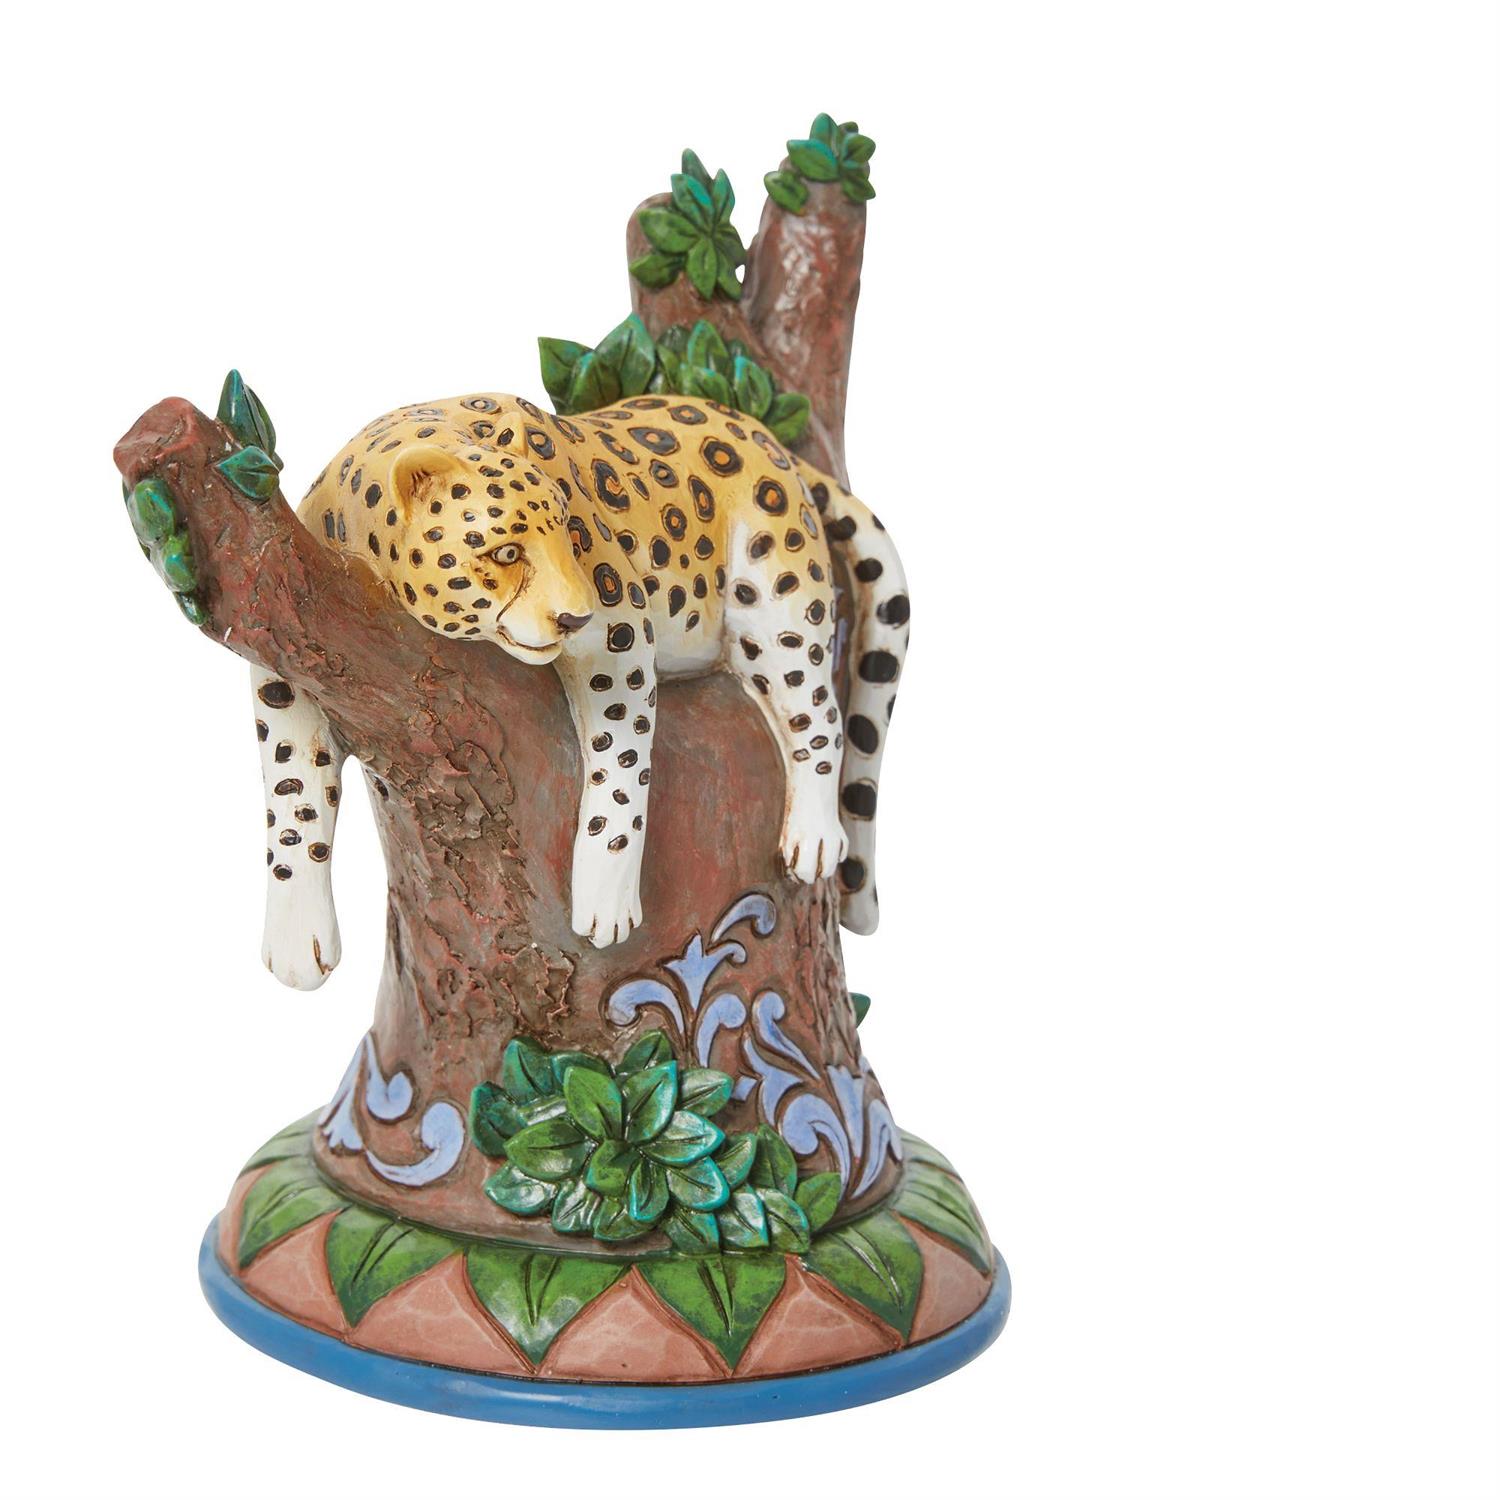 Enesco Gifts Jim Shore Animal Planet Amur Leopard Figurine Free Shipping Iveys Gifts And Decor